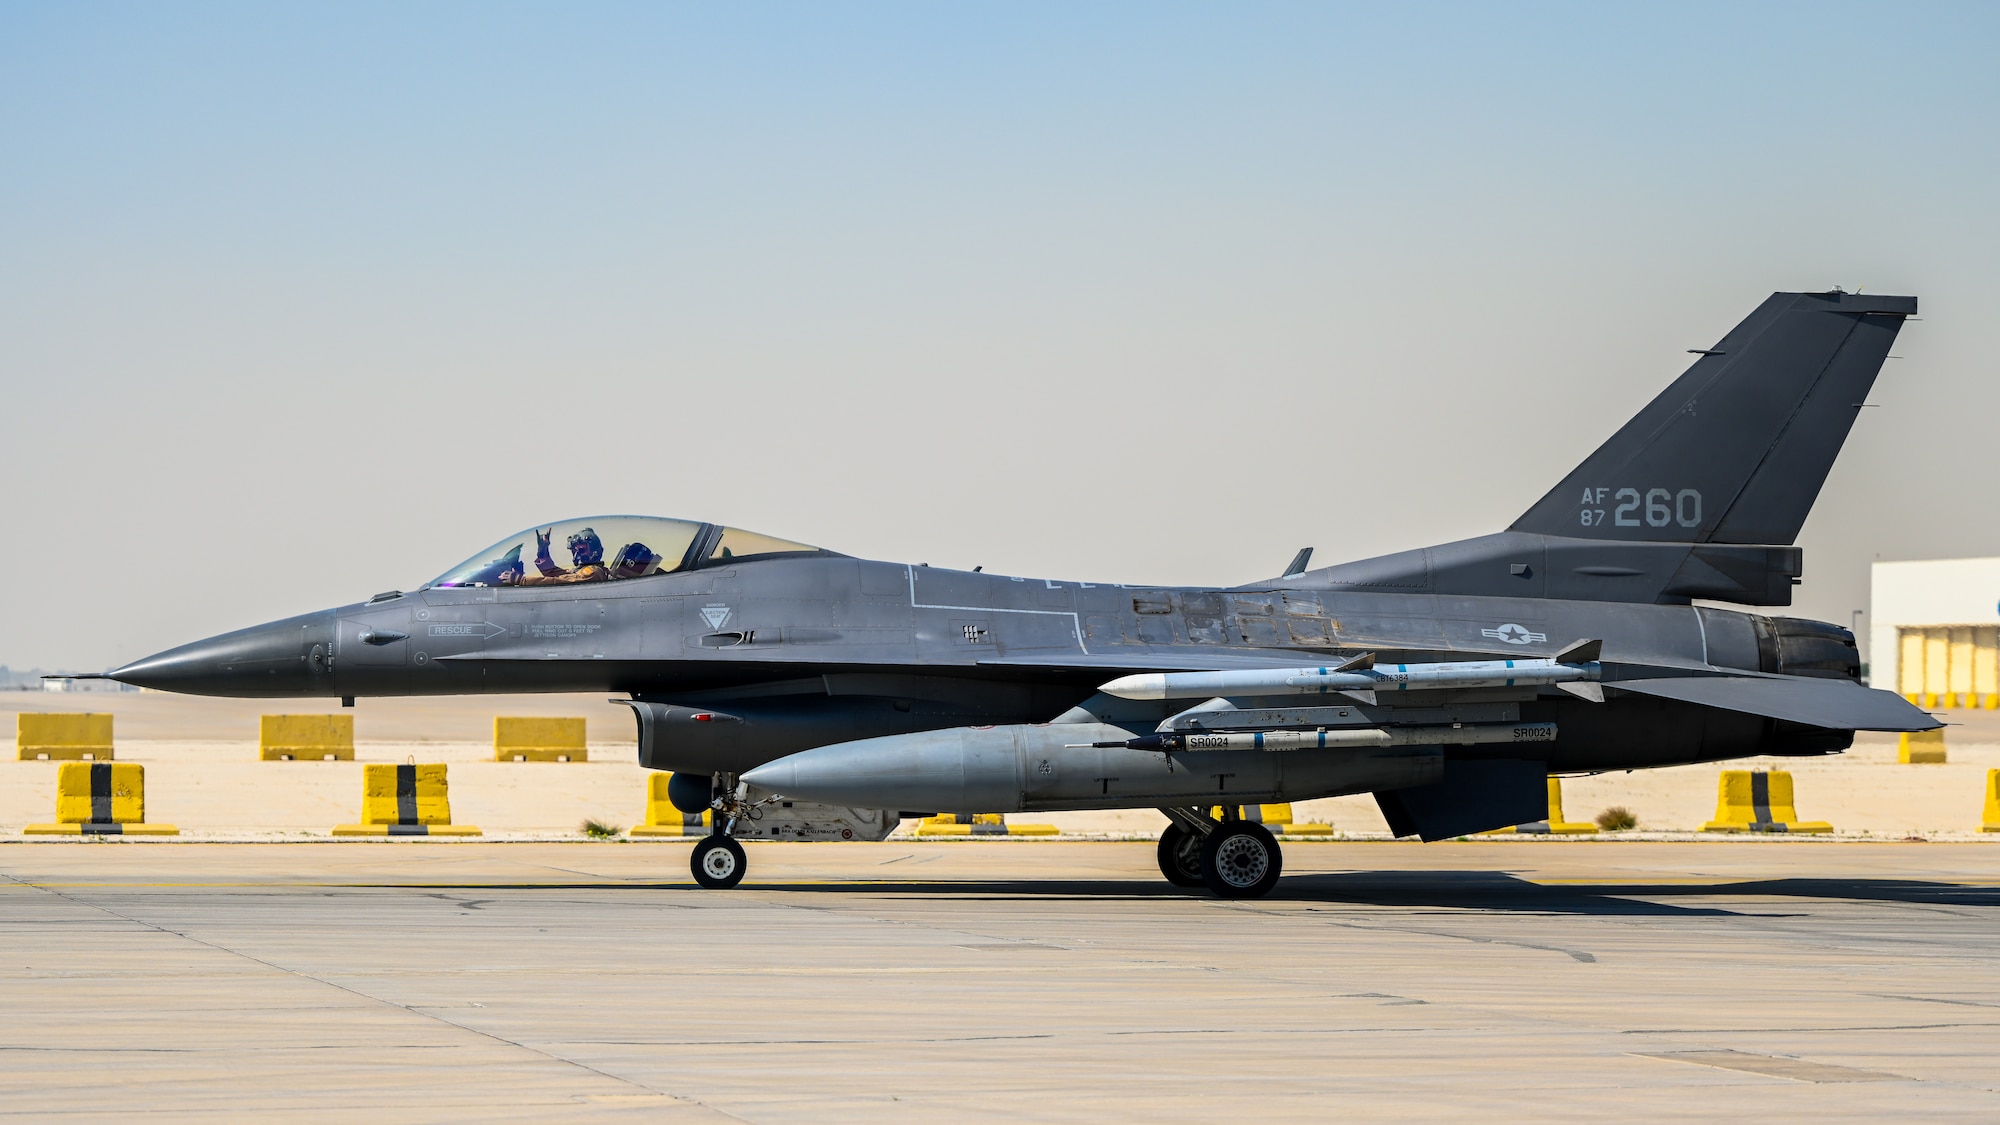 An F-16 Fighting Falcon taxis to the runway at King Abdulaziz Air Base, Kingdom of Saudi Arabia, Feb. 16, 2022. Conducting large force air exercises of this nature strengthen and reinforce air defenses against any potential threats. (U.S. Air Force photo by Staff Sgt. Christina Graves)